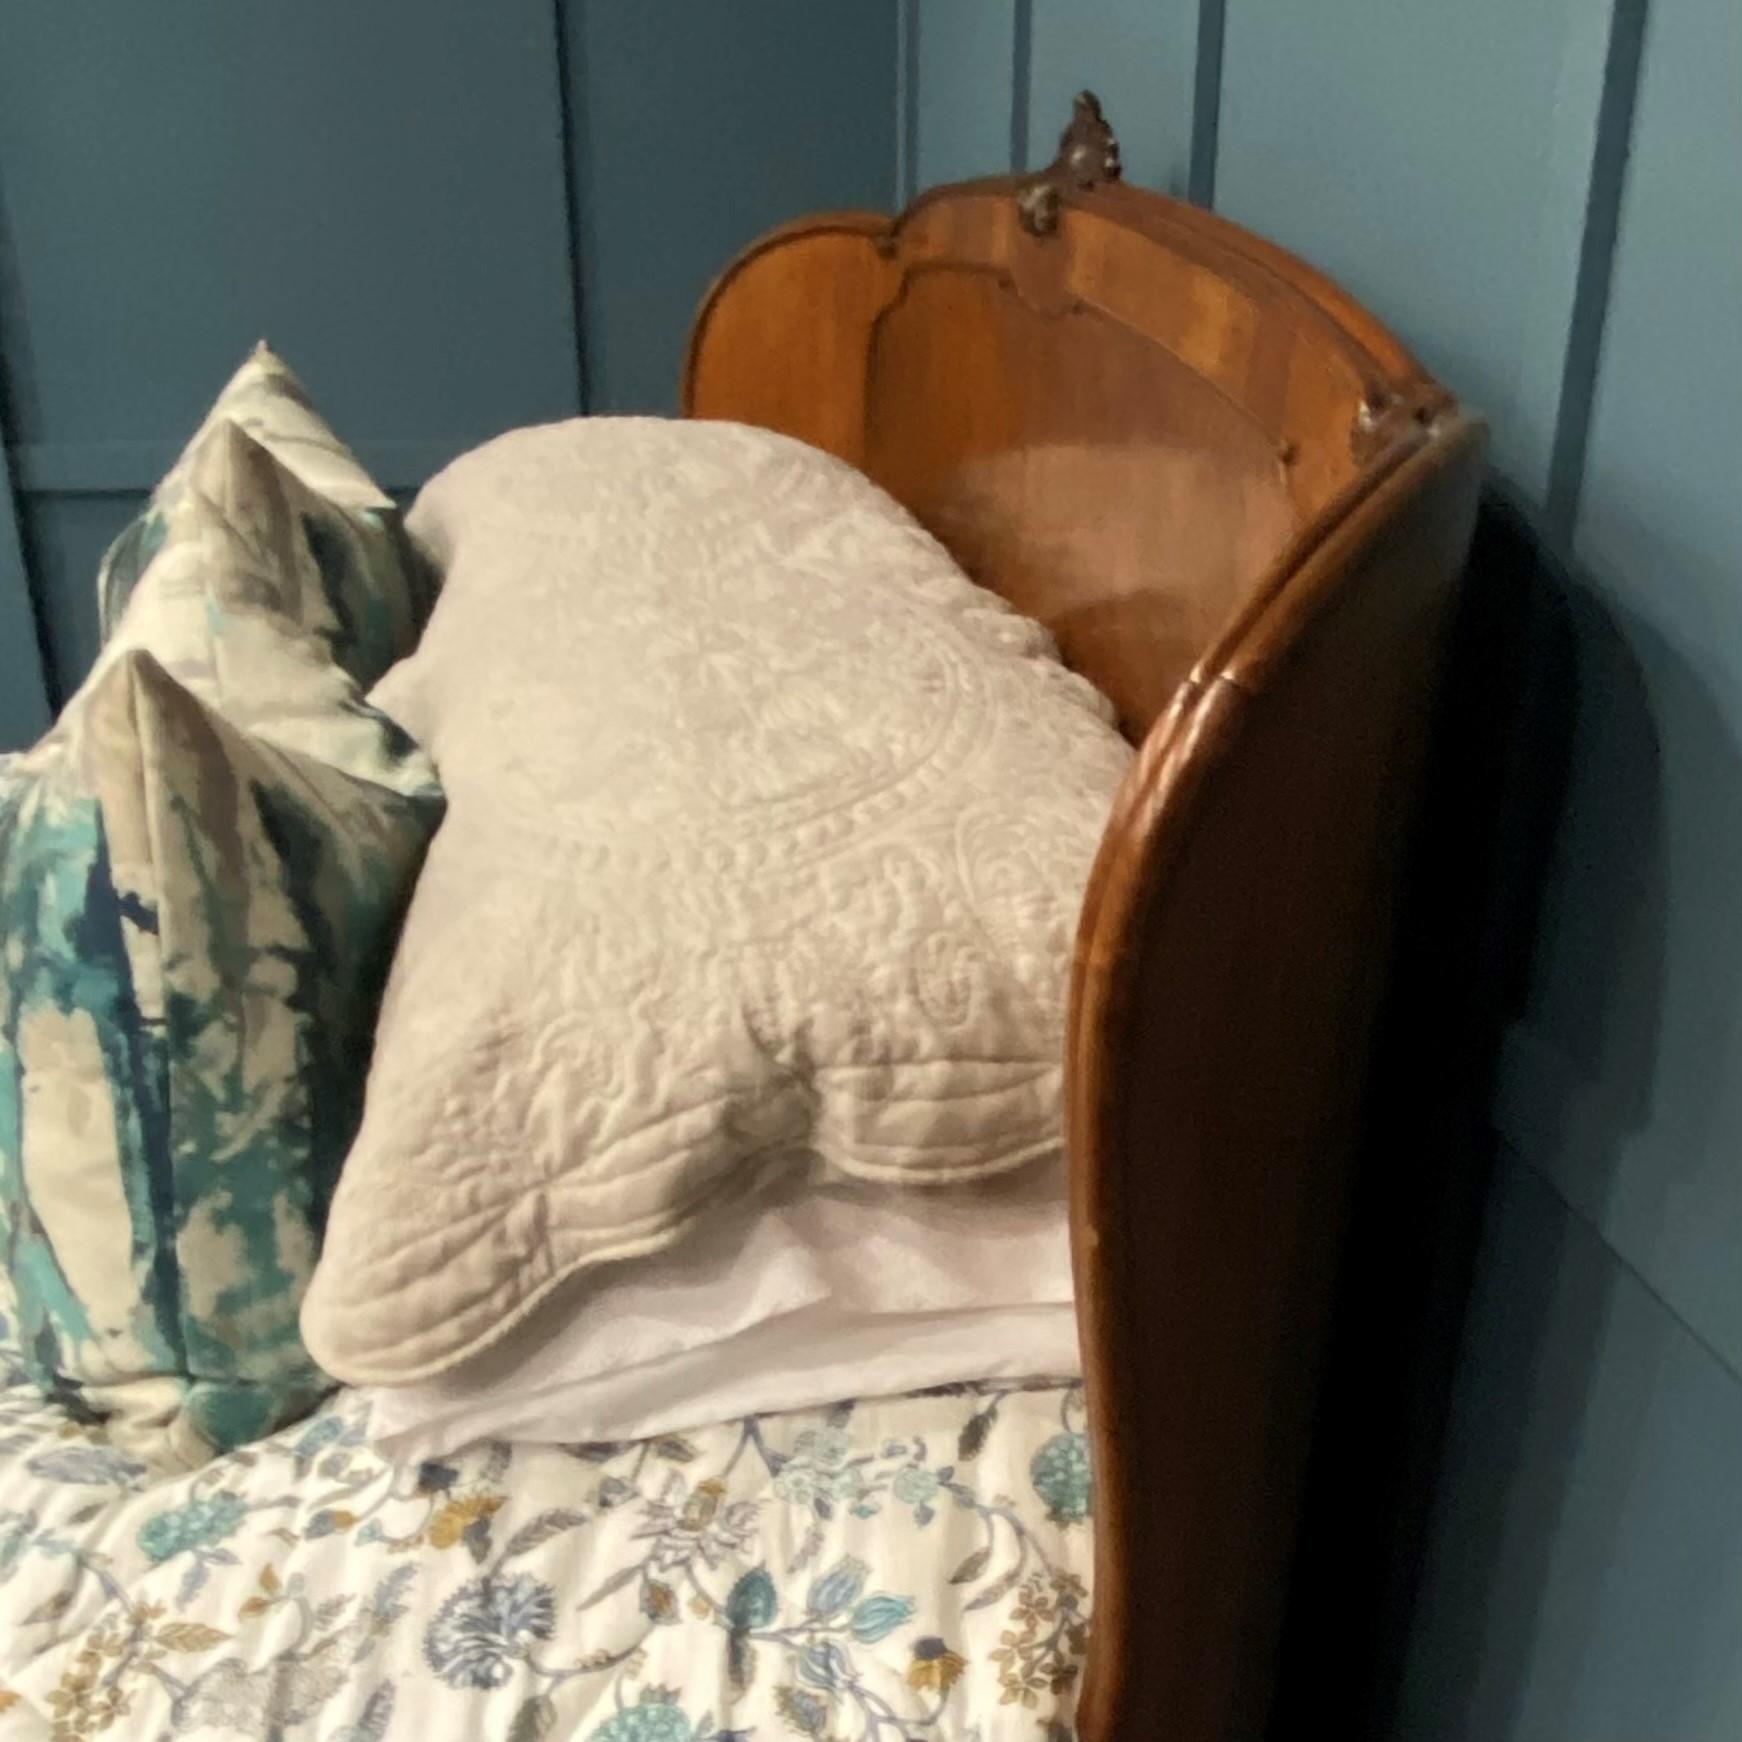 King size/small super king 5’6 Italian wooden bed with a curved head and foot end. The frame is large but the head and foot end are quite low so it will not dominate the bedroom or perhaps ideal for a loft bedroom
The frame is made of Walnut and